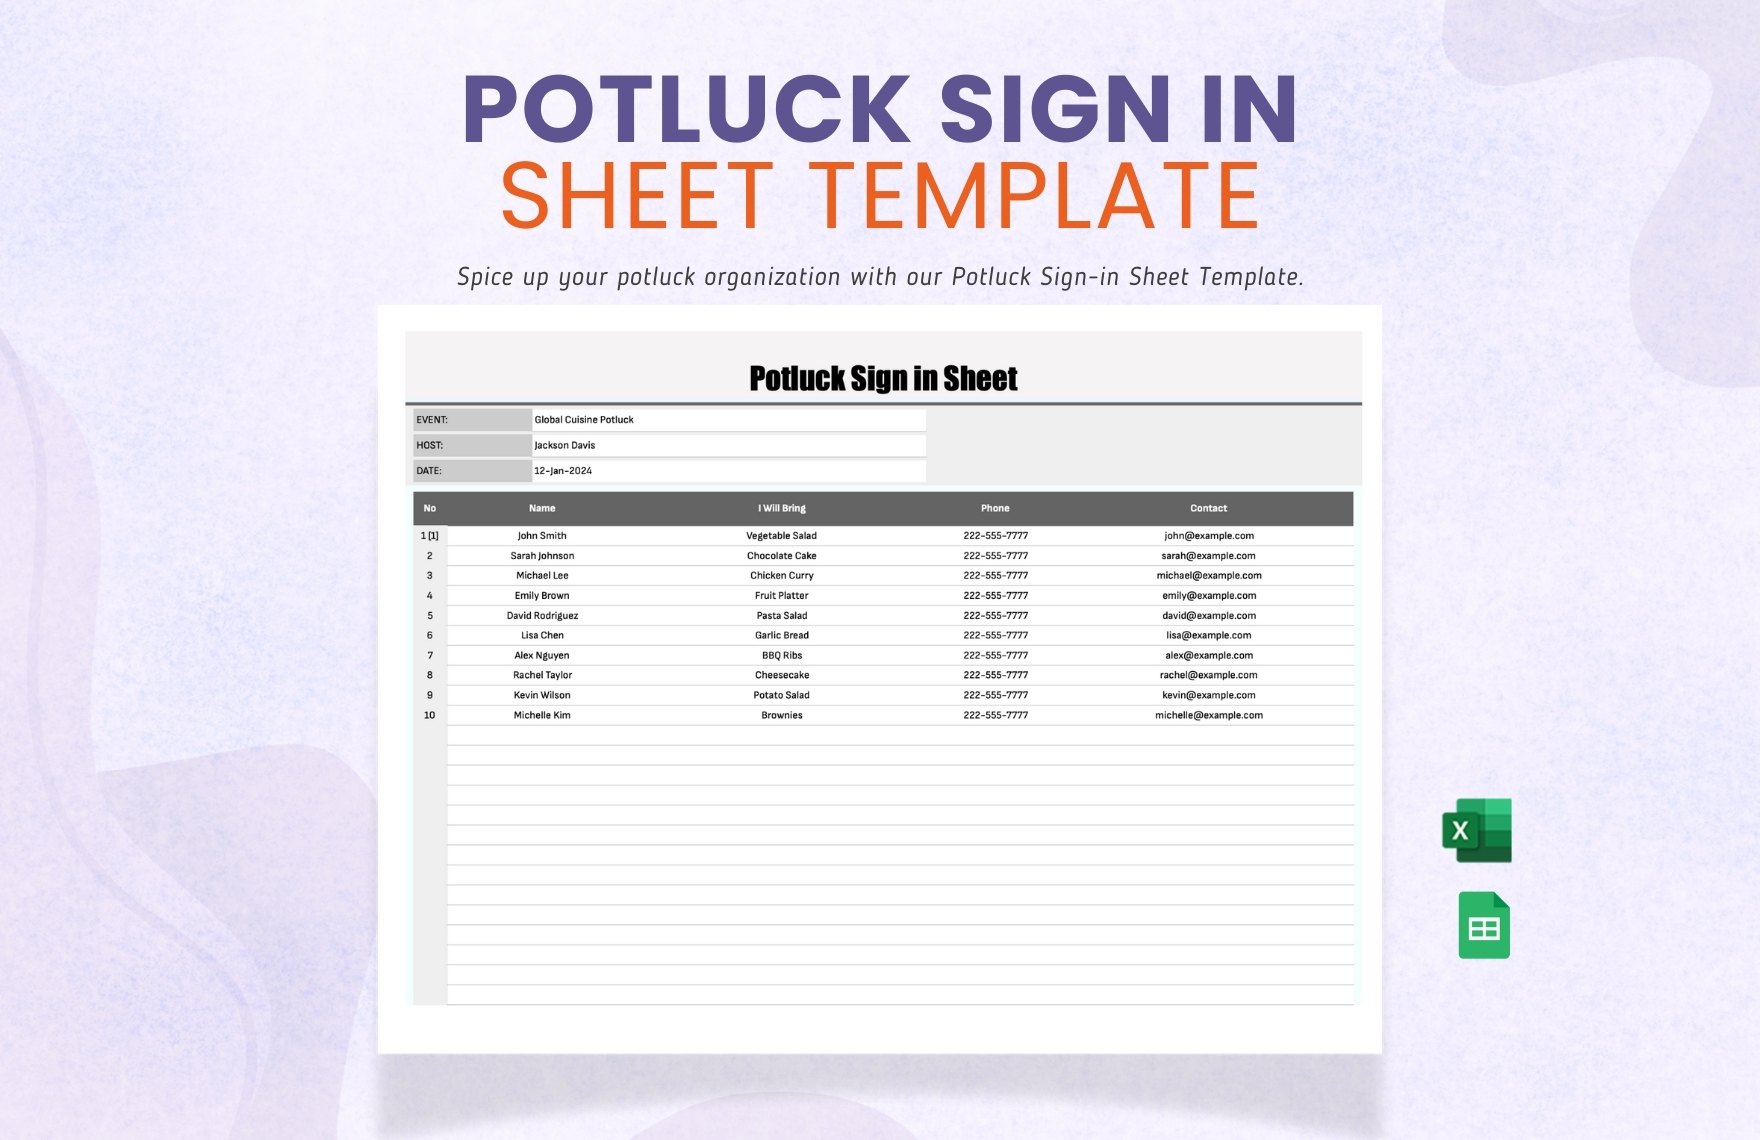 Potluck Sign in Sheet Template